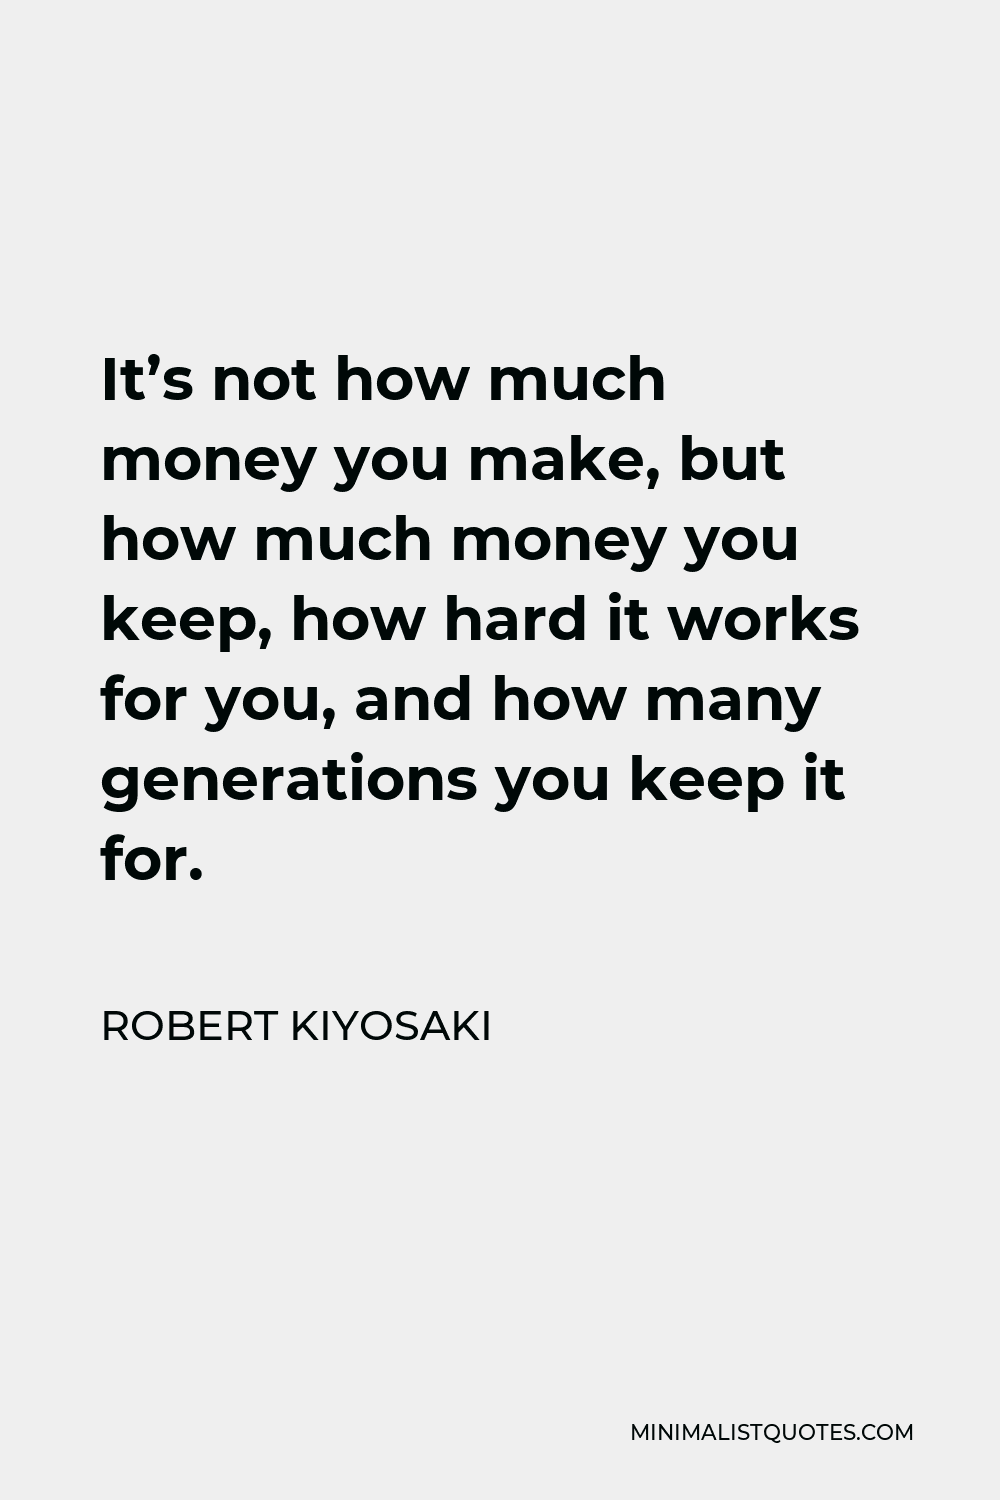 Robert Kiyosaki Quote - It’s not how much money you make, but how much money you keep, how hard it works for you, and how many generations you keep it for.